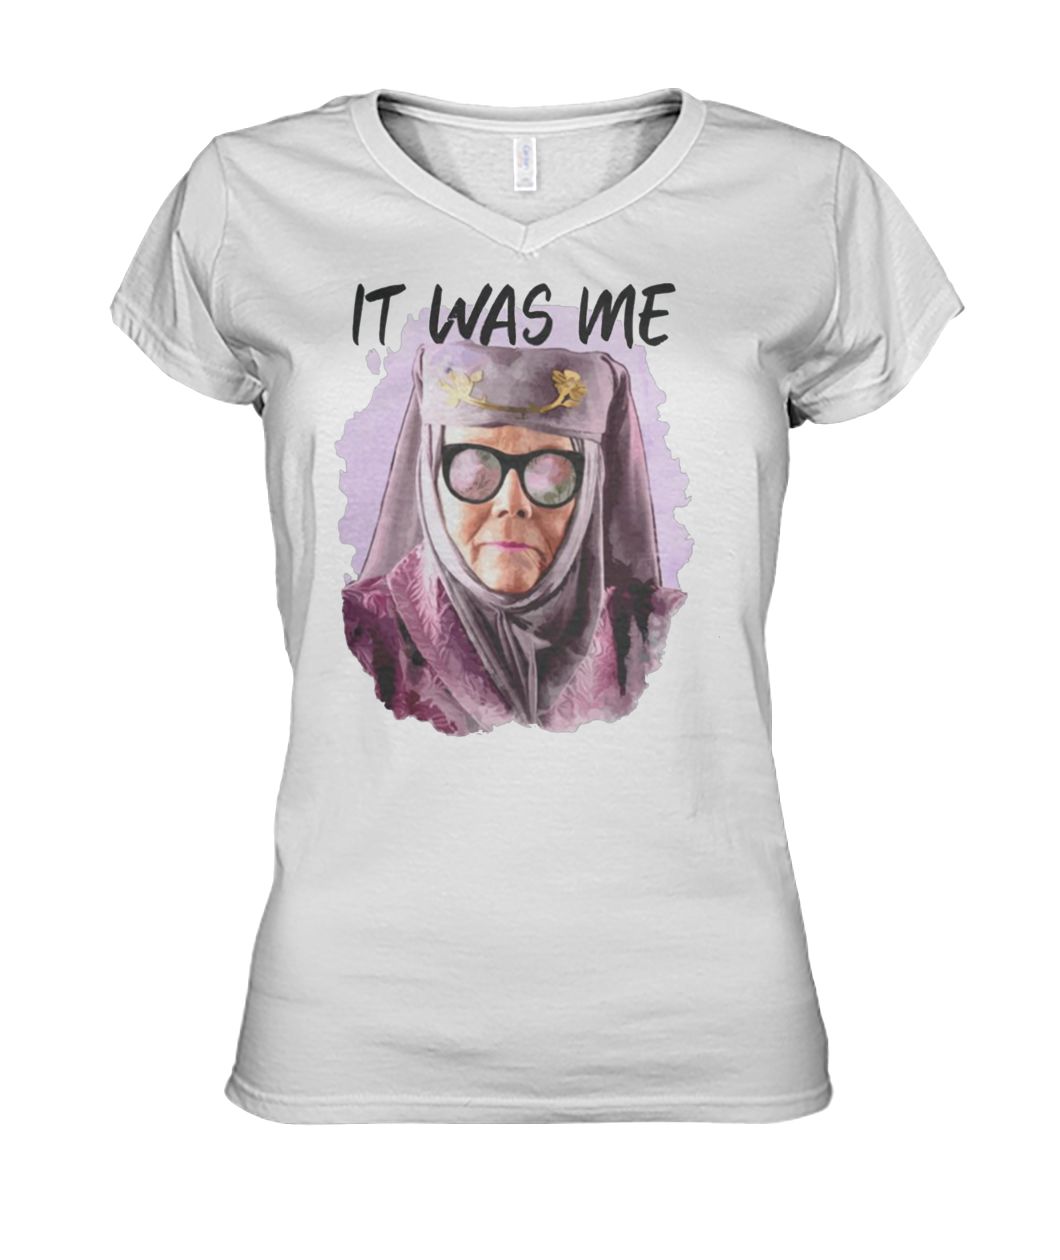 Olenna tyrell tell cersei it was me game of thrones women's v-neck